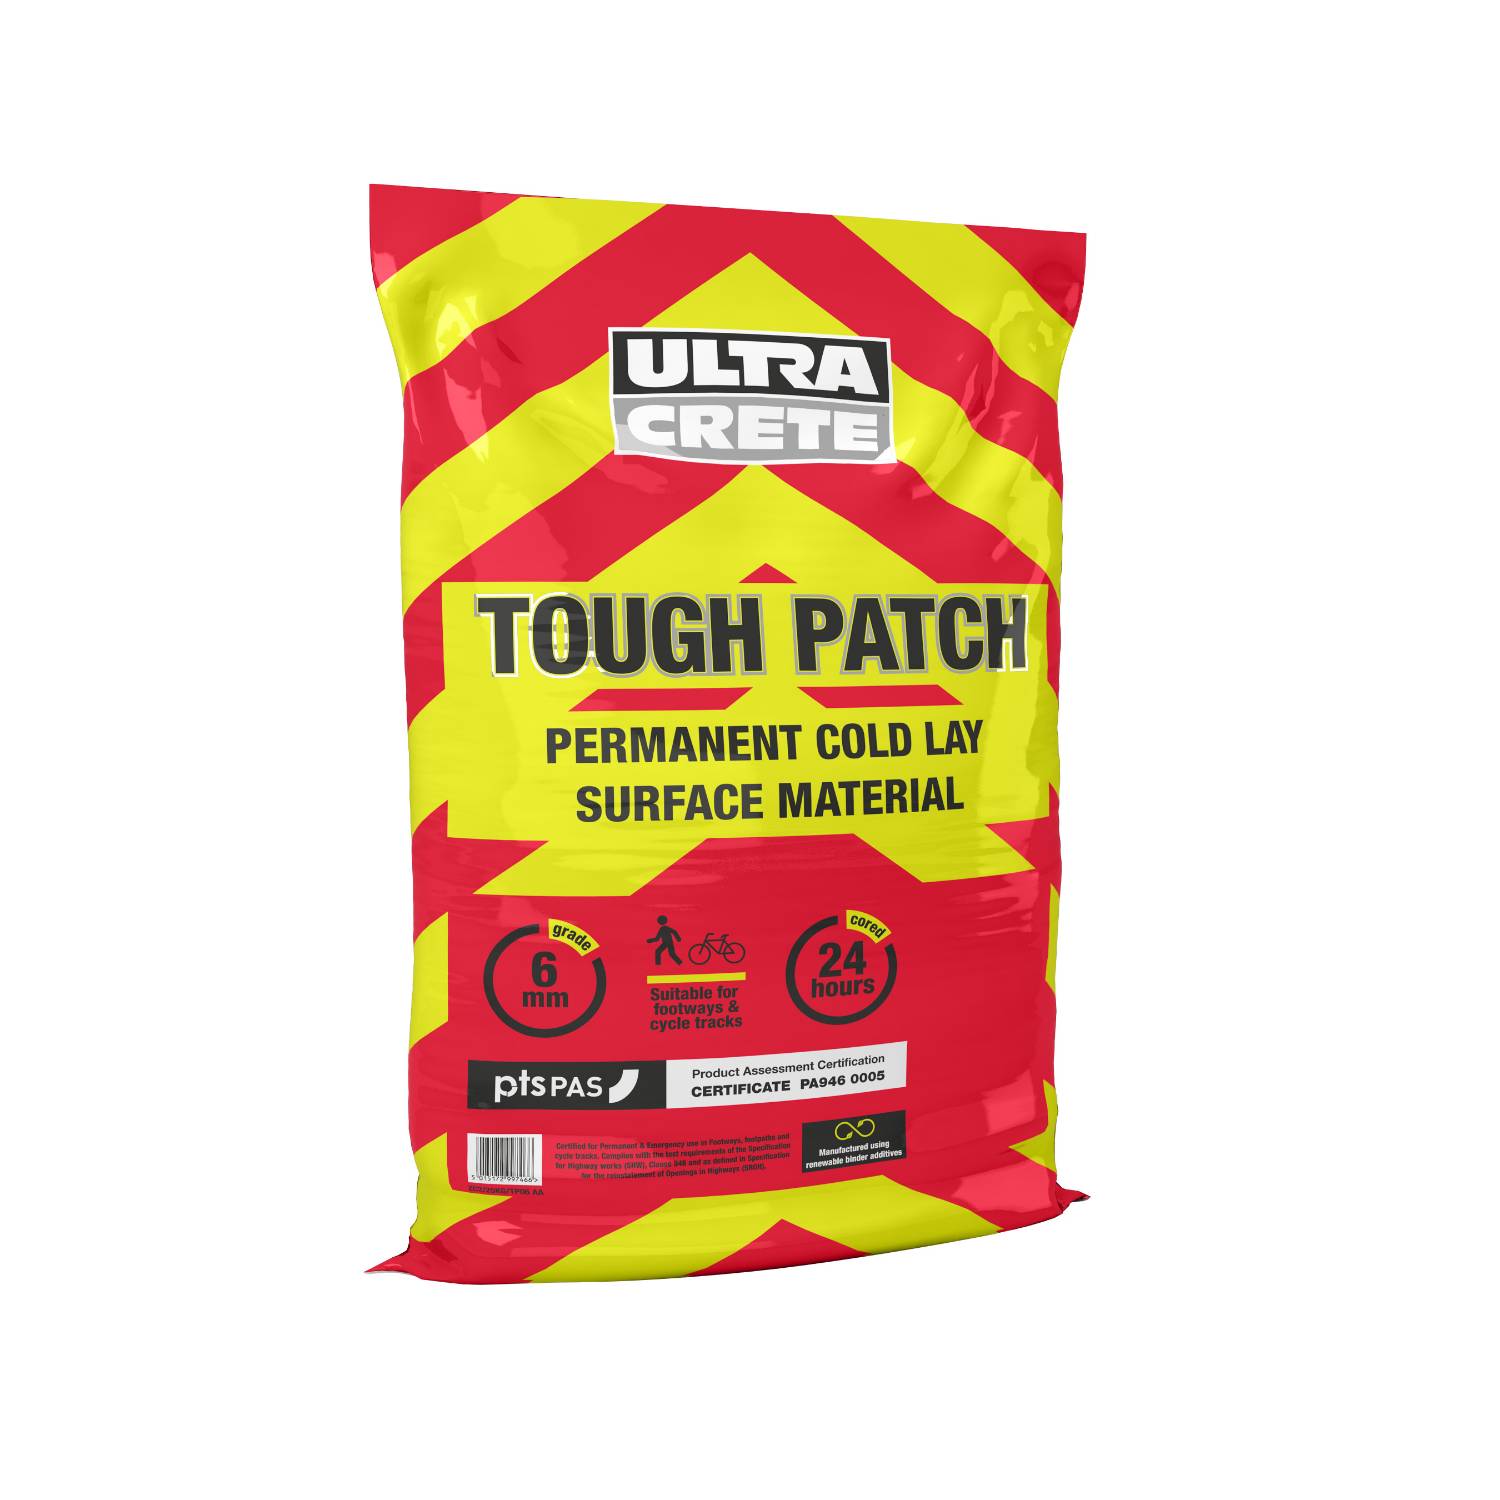 Tough Patch® 6 mm Permanent Cold Lay Surface Material